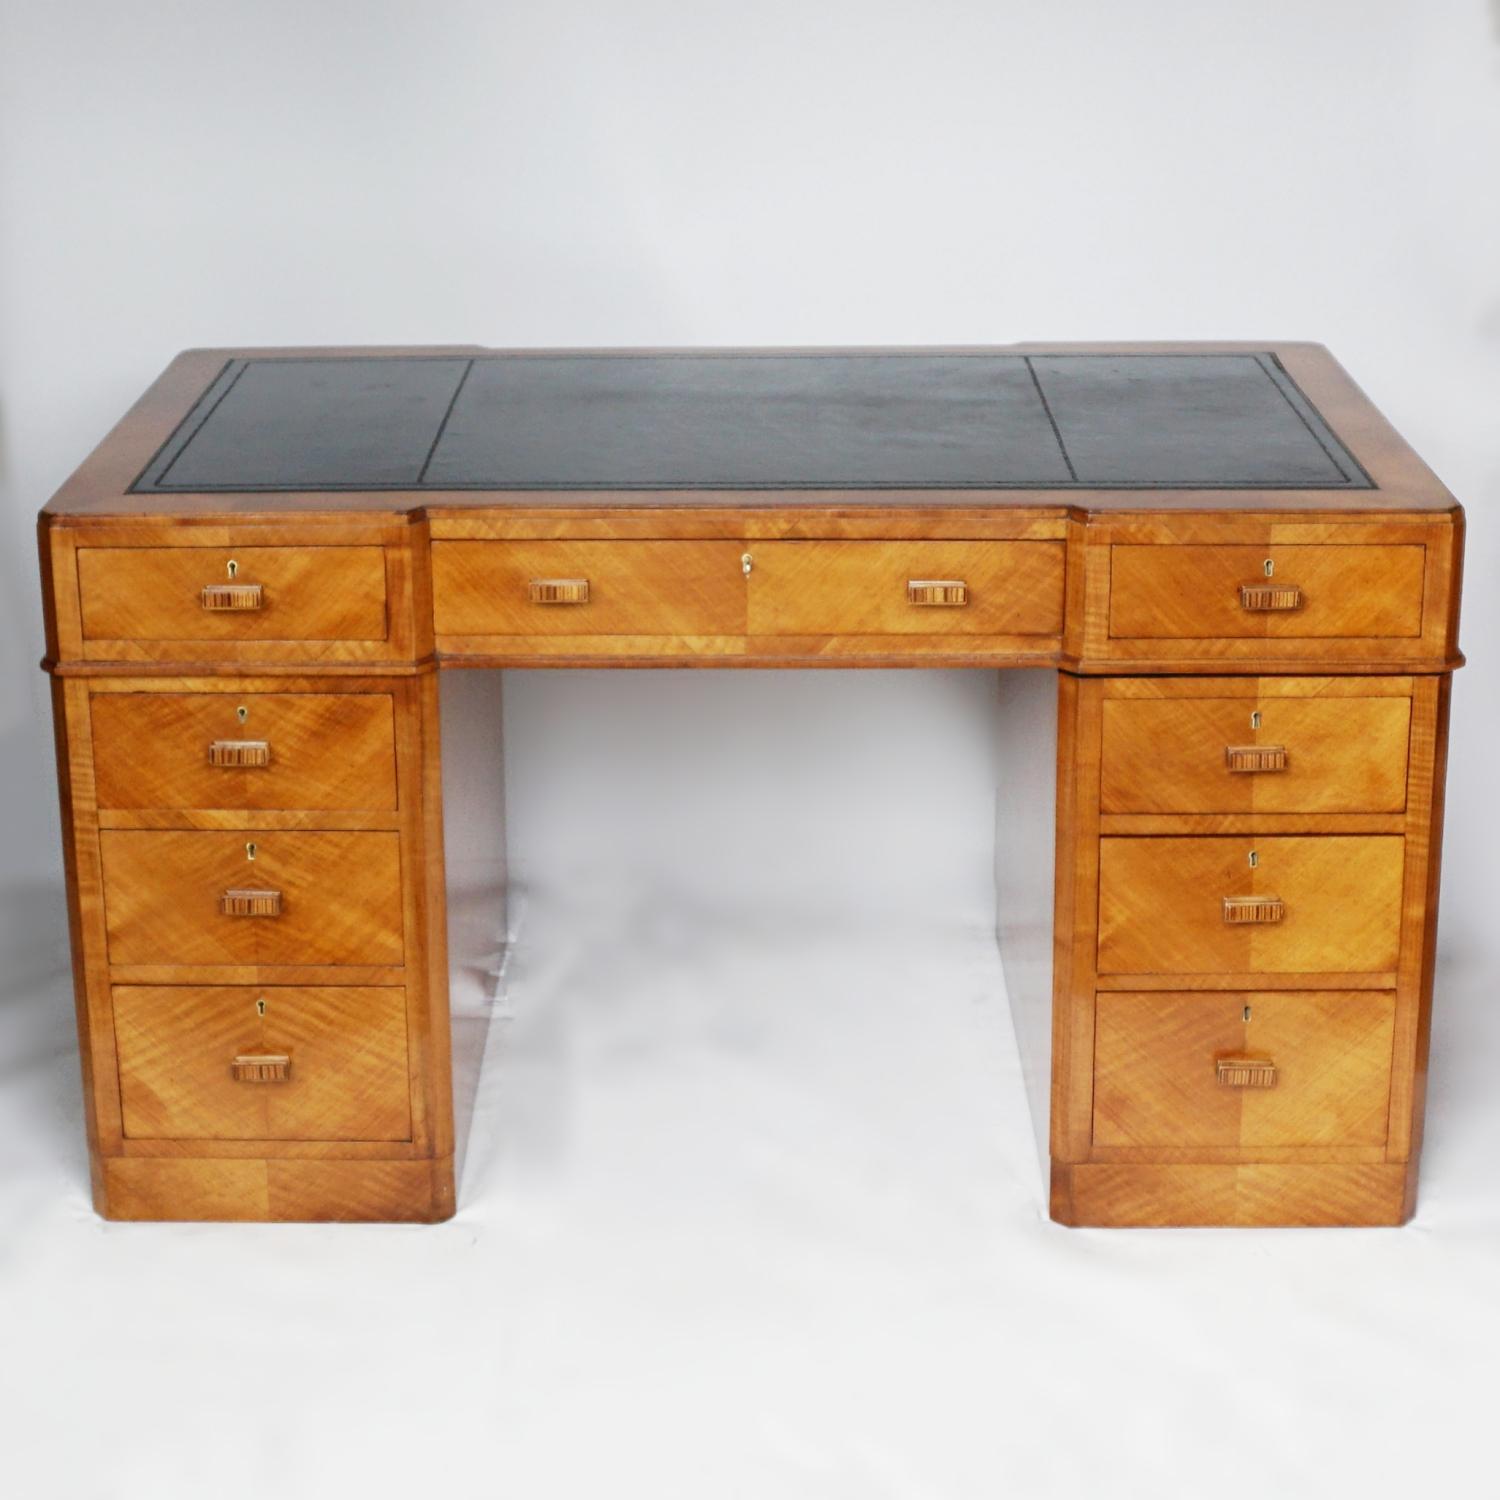 English Art Deco Pedestal Desk Attributed to Heal's of London, Circa 1935